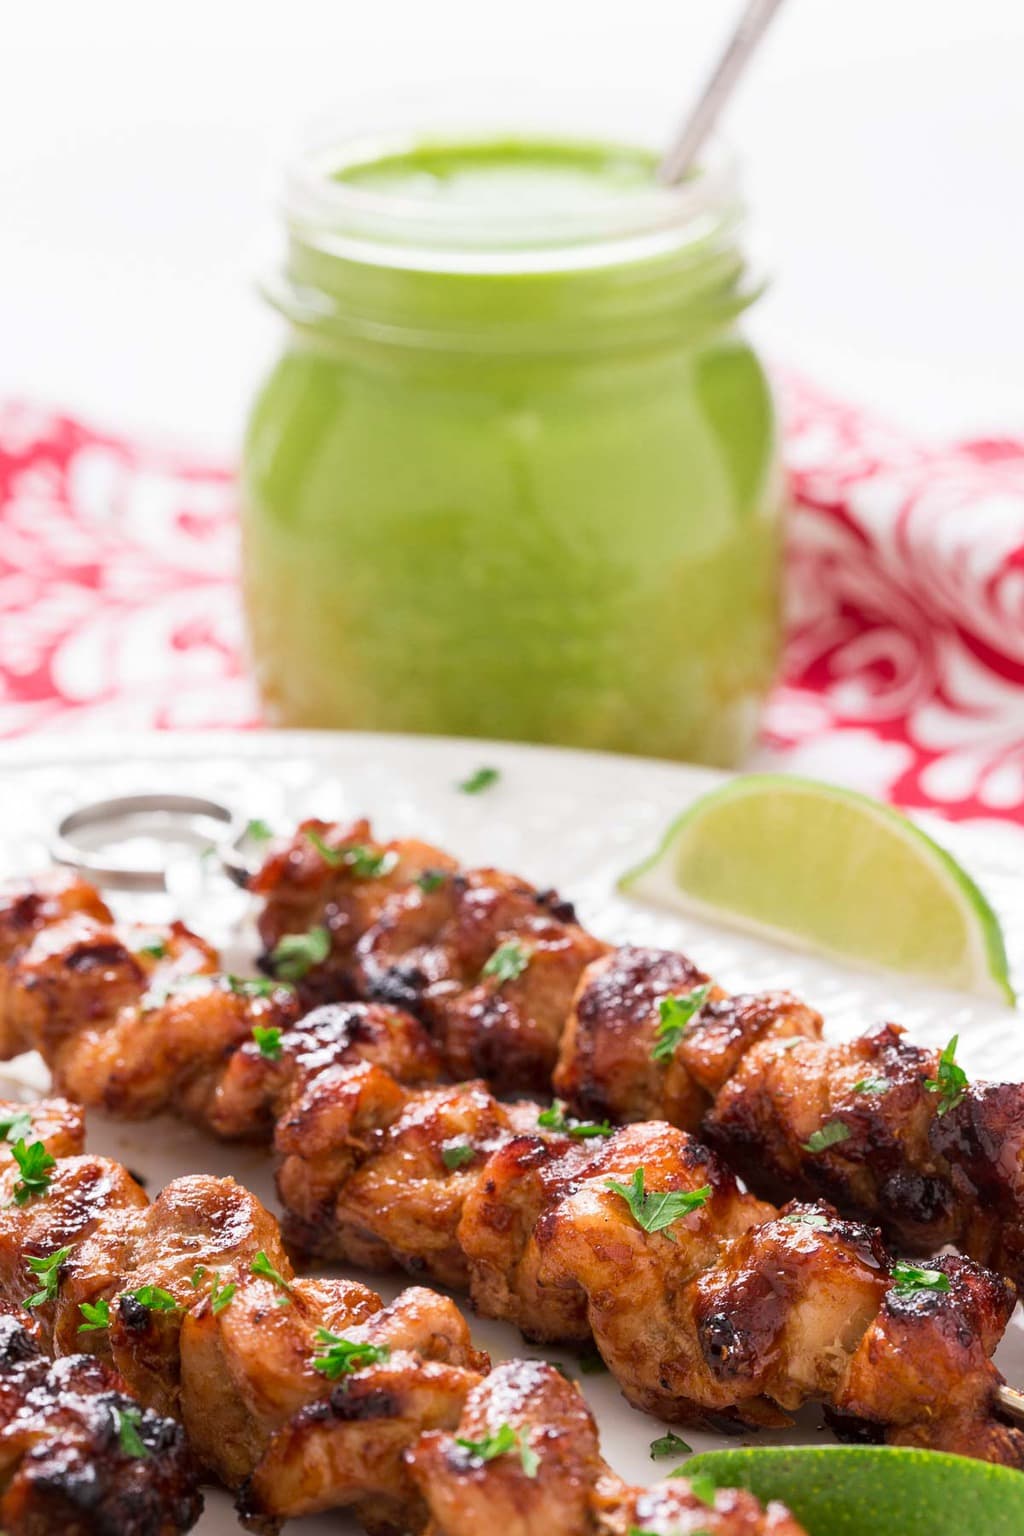 Ultra closeup photo of a serving platter filled with Peruvian Grilled Chicken Skewers with a glass jar filled with Peruvian Green Sauce in the background.